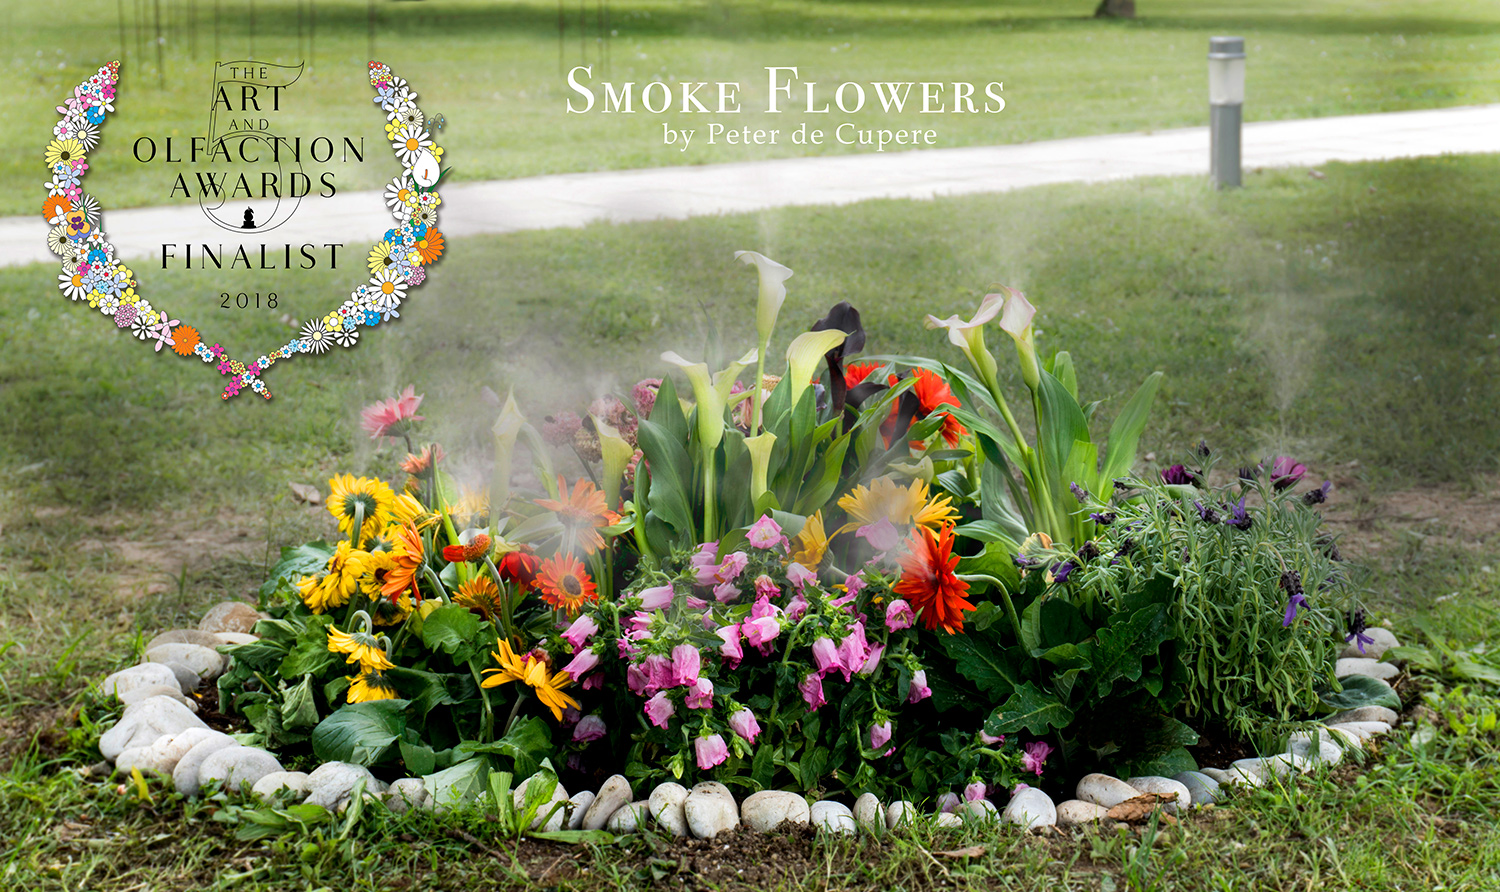 Smoke-Flowers-by-Peter-de-Cupere-Overview-1-LEFT-TOP-2